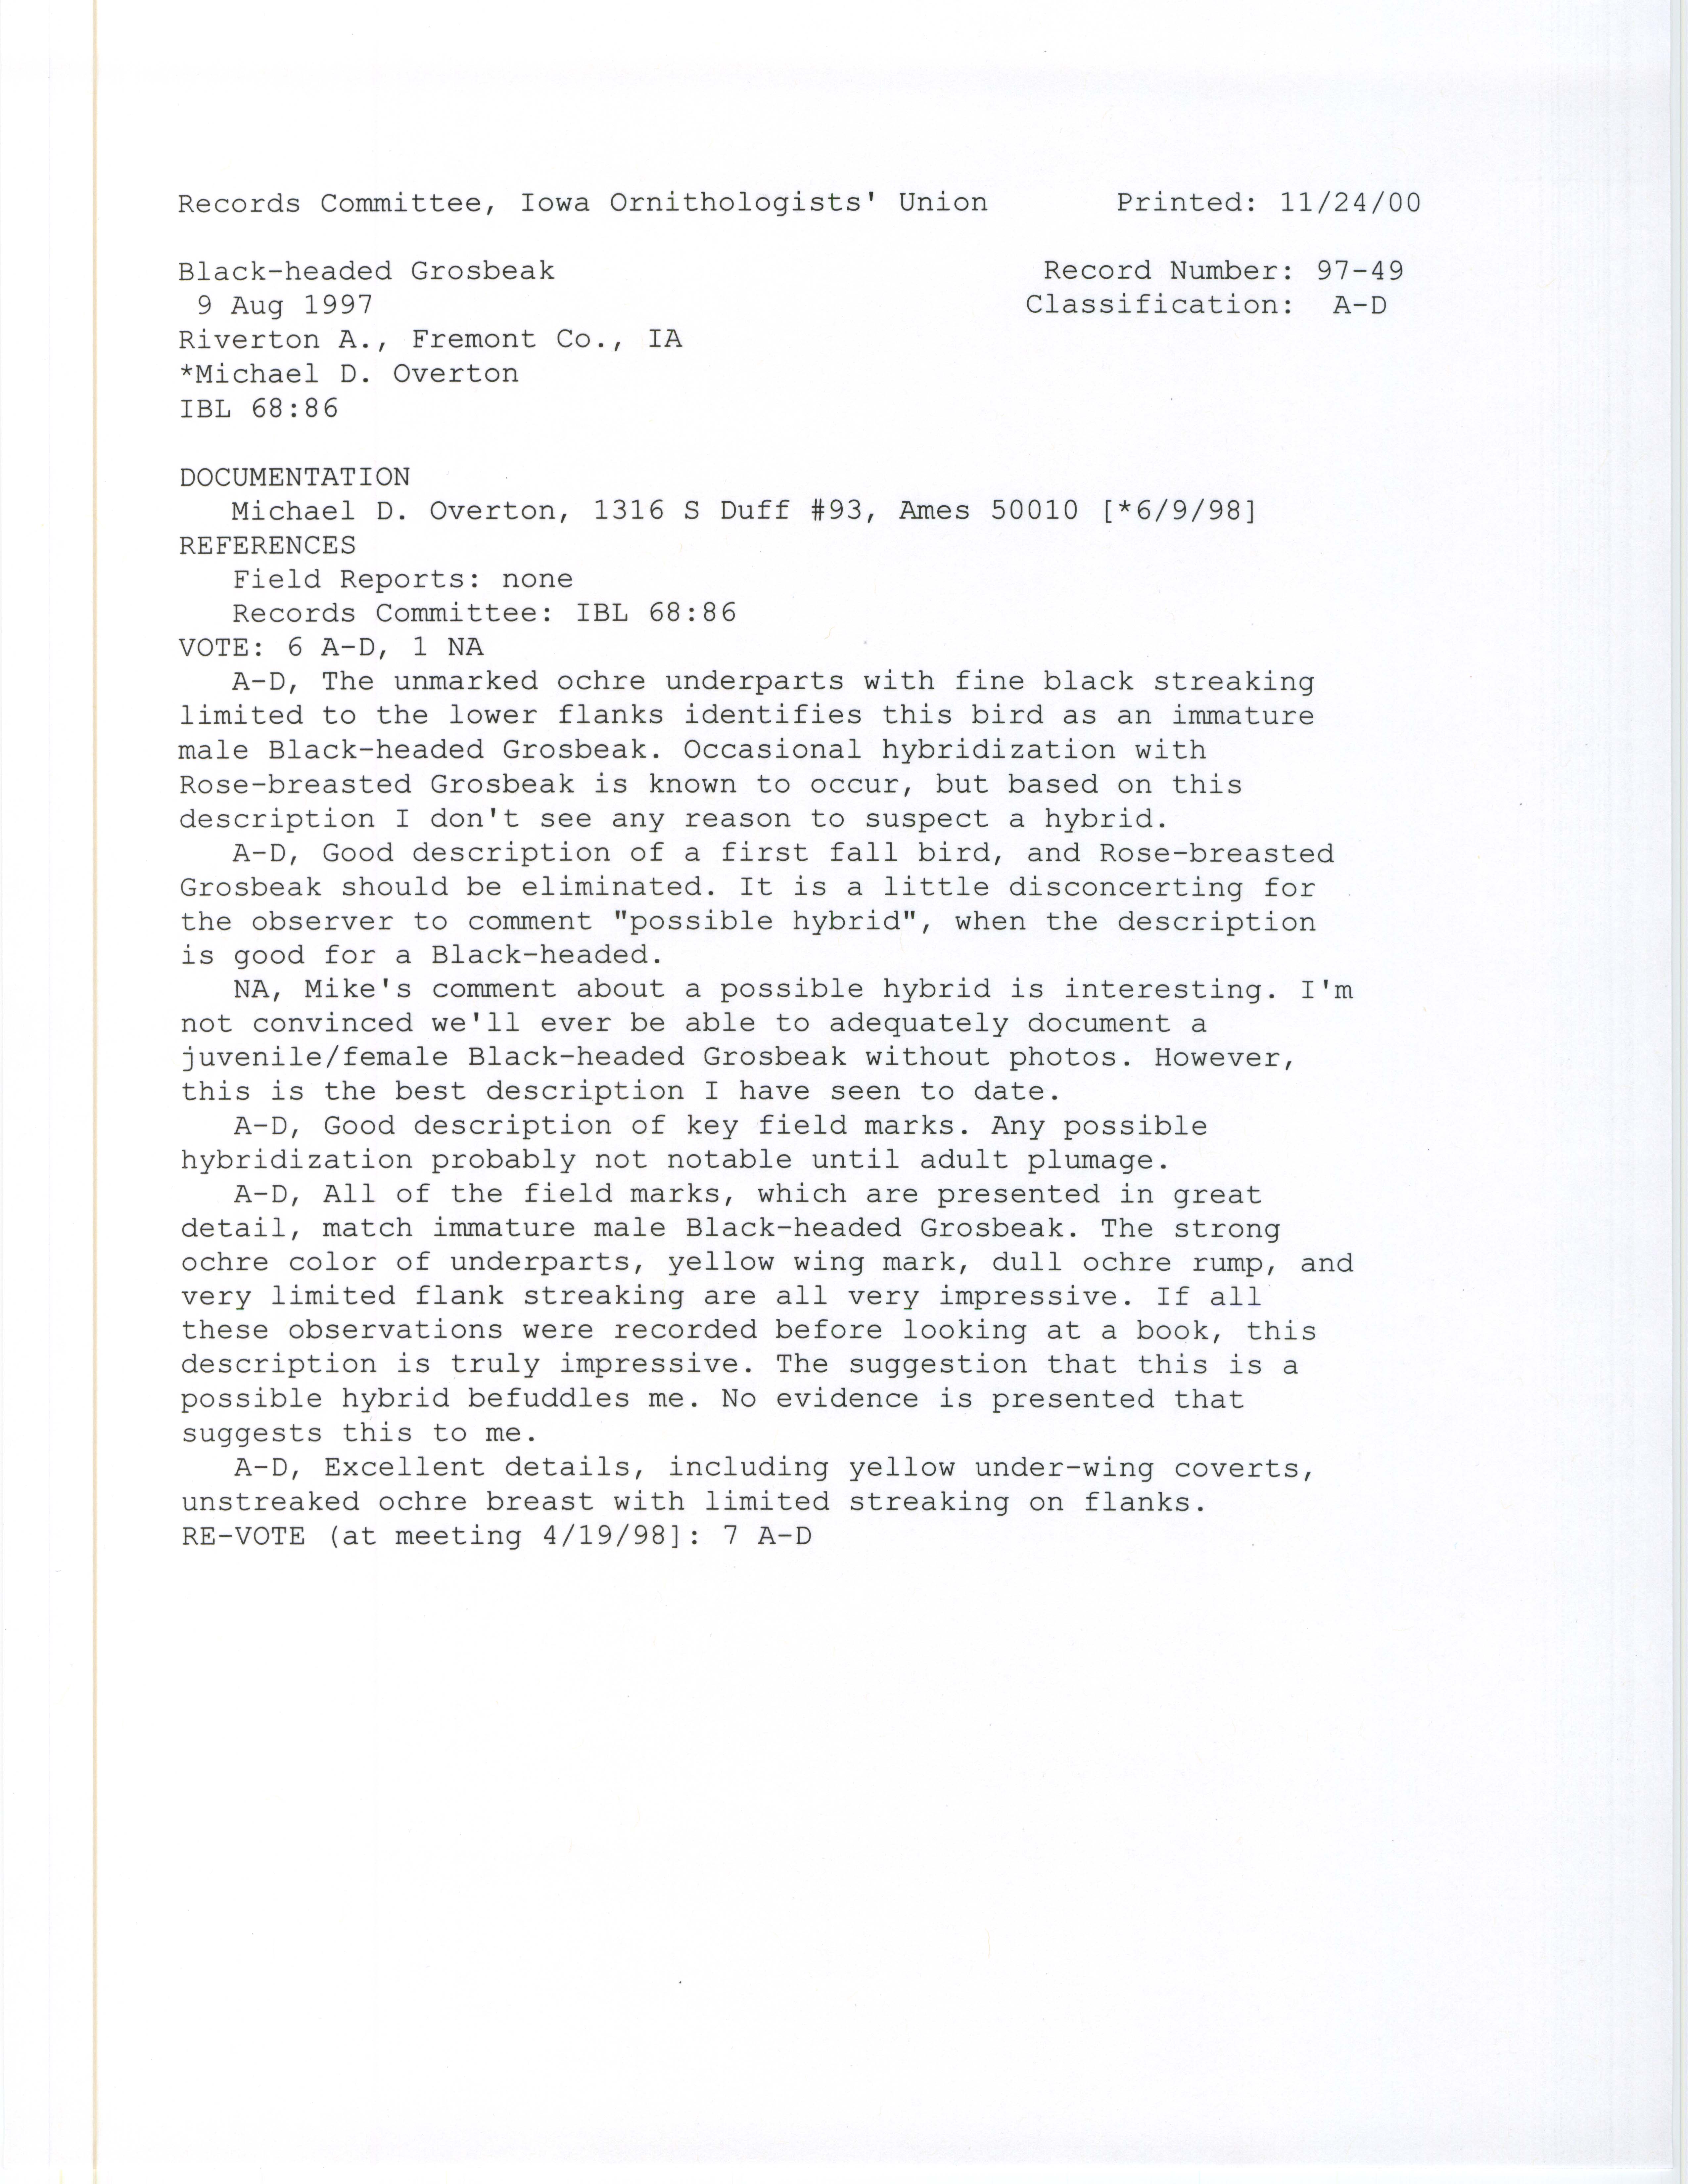 Records Committee review for rare bird sighting for Black-headed Grosbeak at Riverton Wildlife Area, 1997